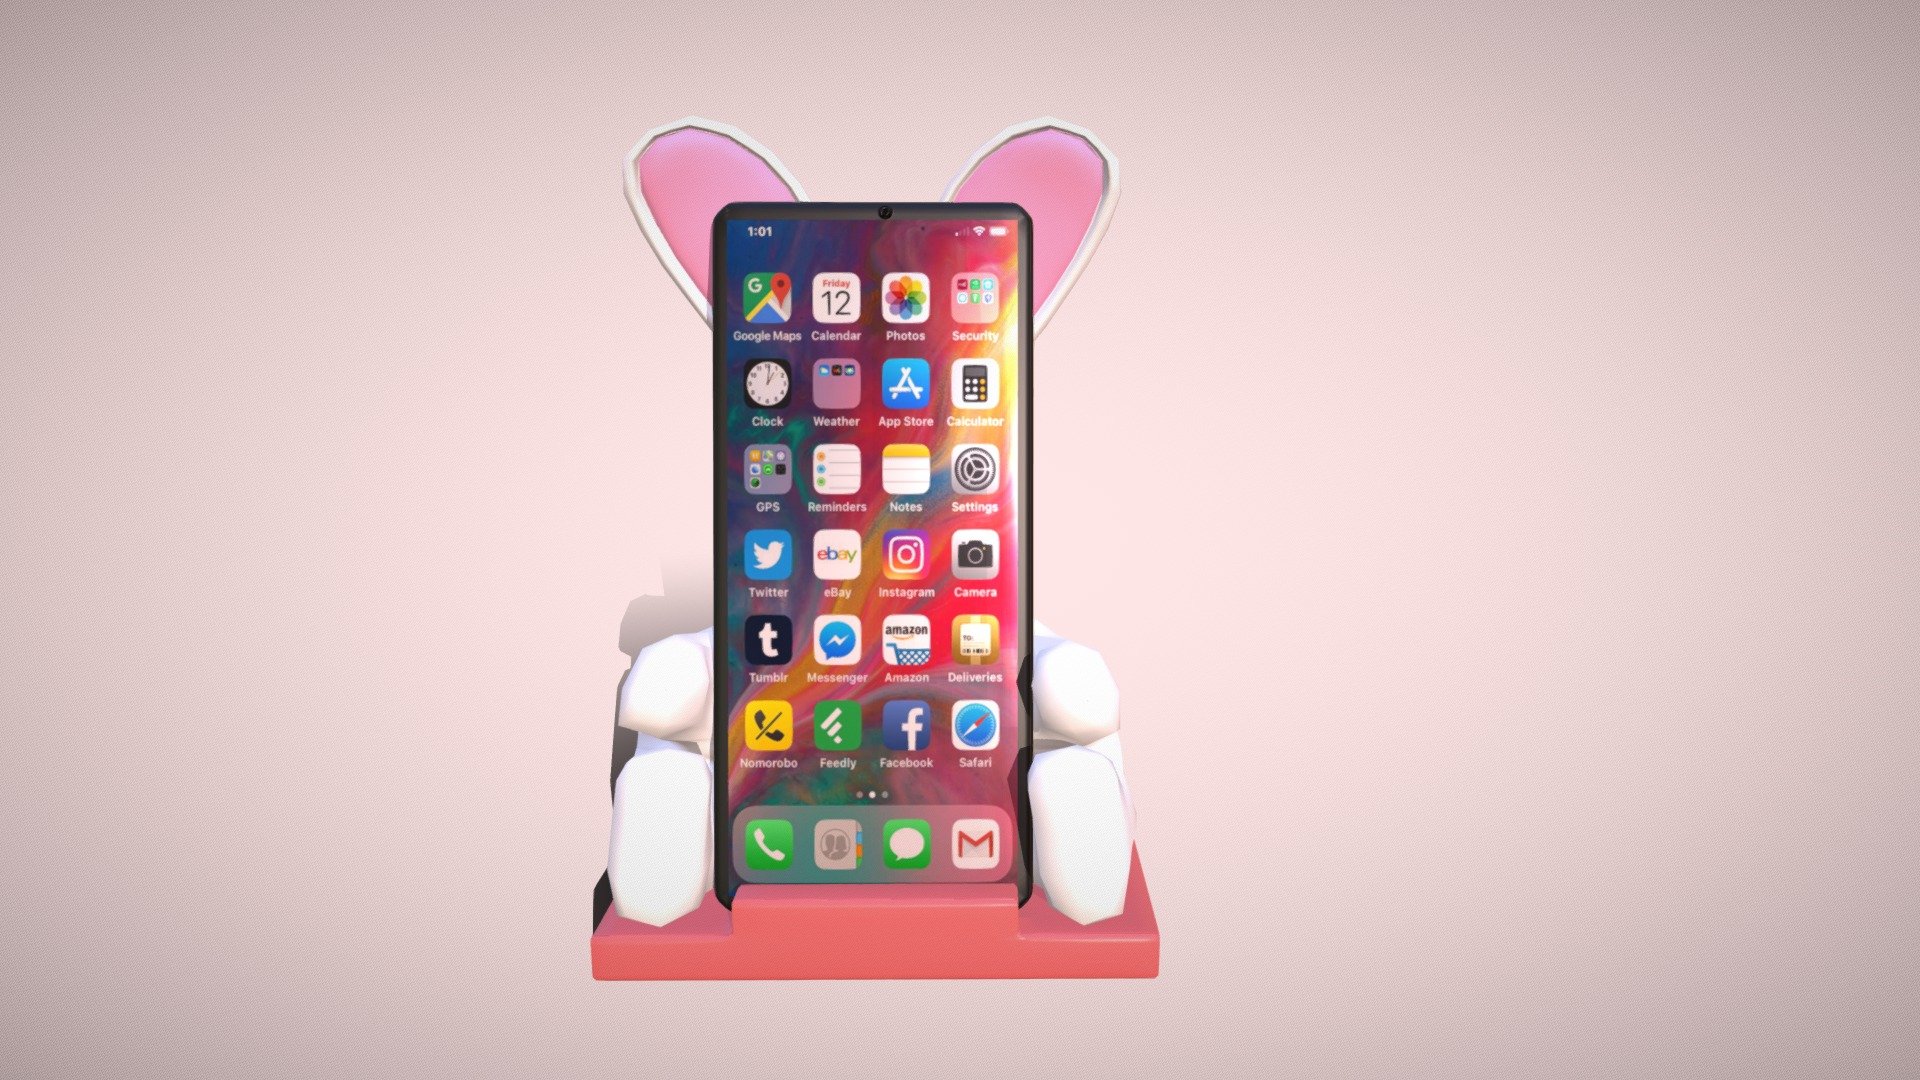 This is model of phone model in shape of bunny. Bunny holding low poly model of phone.
Model was made as a low poly.

This asset pack contains:

Model of phone holder in shape of bunny and phone.

Technical information:

Texture 2048x2048 ( one pack ) 

Phone holder - 2316 tris, 1290 faces, 2448 edges, 1164 verts.

Phone - 336 tris, 168 faces, 336 edges, 170 verts.

Contact details:

lukas.boban123@gmail.com

07591664224

https://www.facebook.com/lukas.boban/

Thank you for taking look please consider leave like.

Model will be free till 06/05/2021 3d model